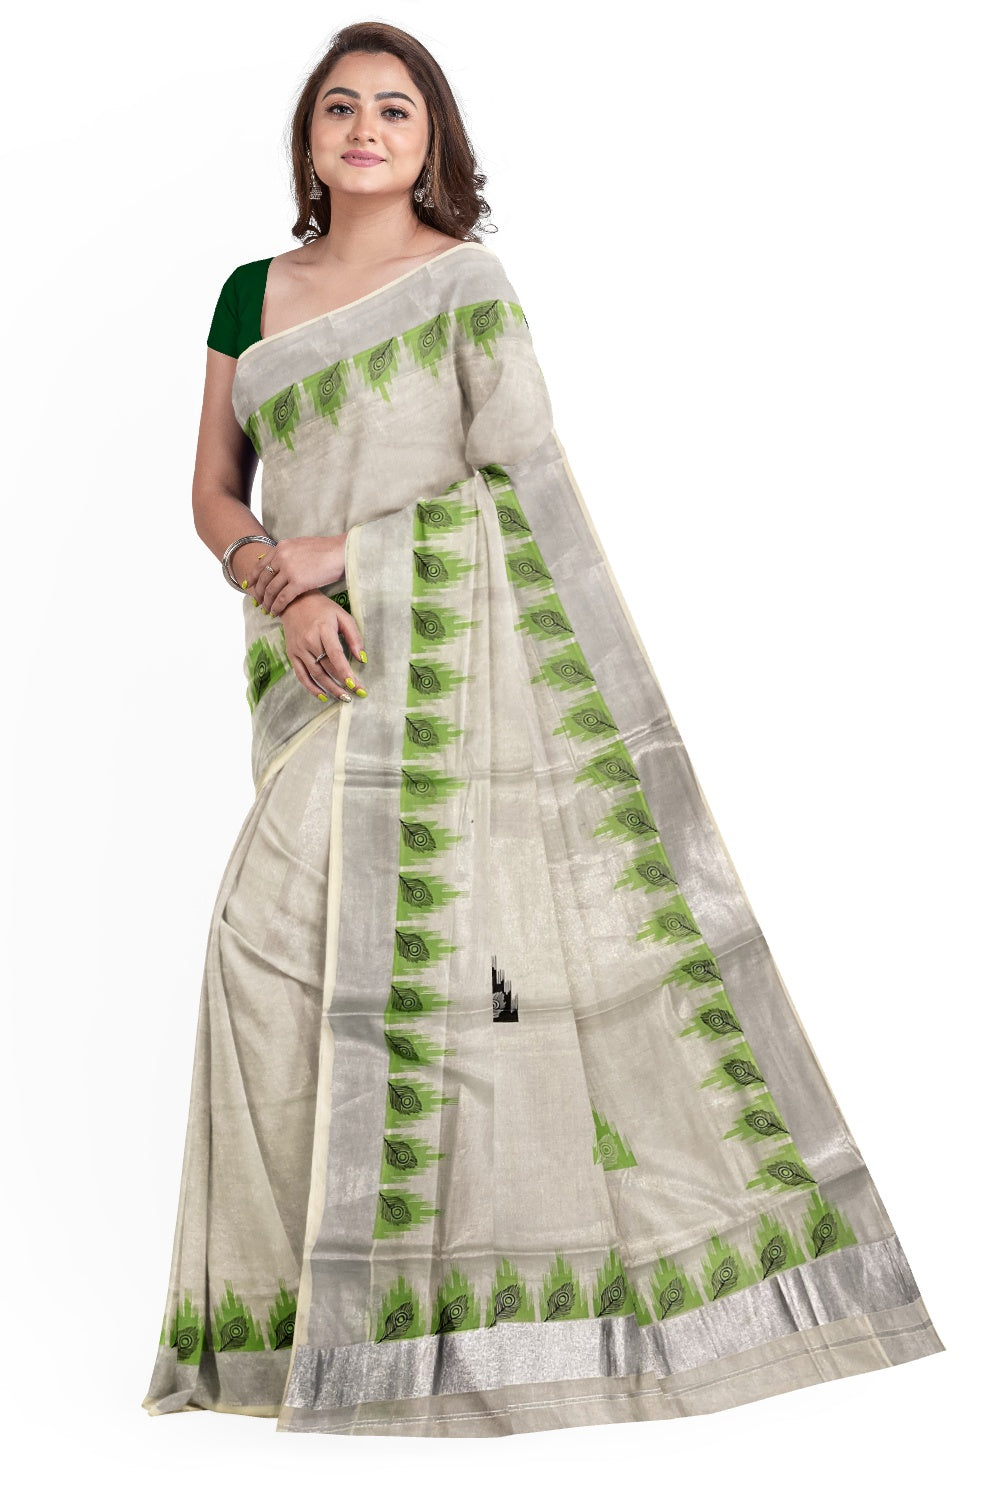 Kerala Silver Tissue Saree with Peacock Feather Mural Print